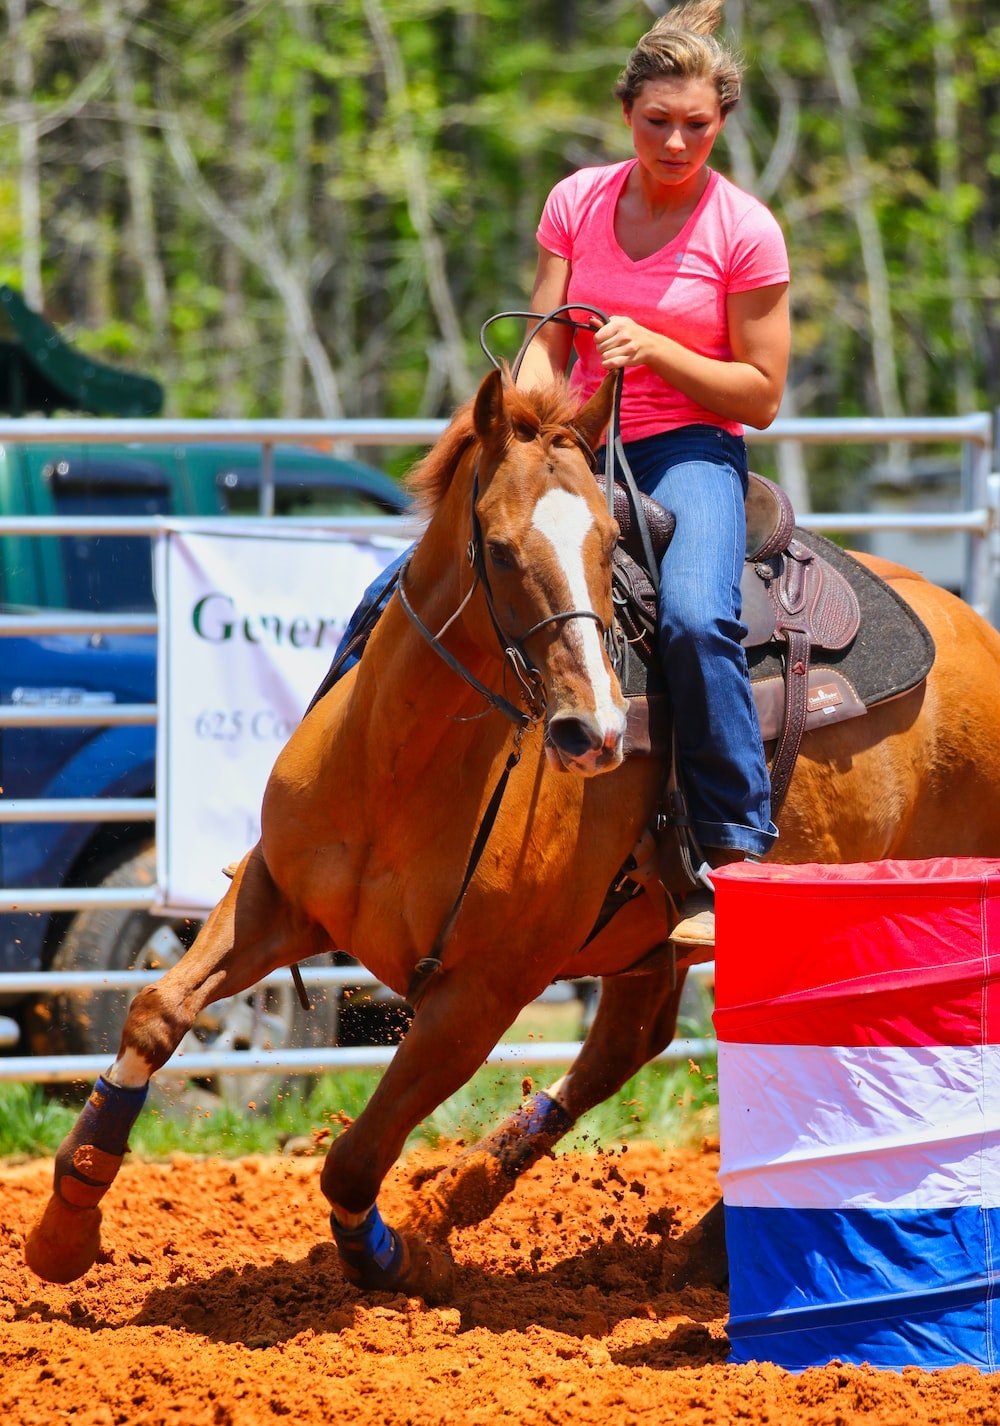 Barrel Racing Picture. Download Free Image